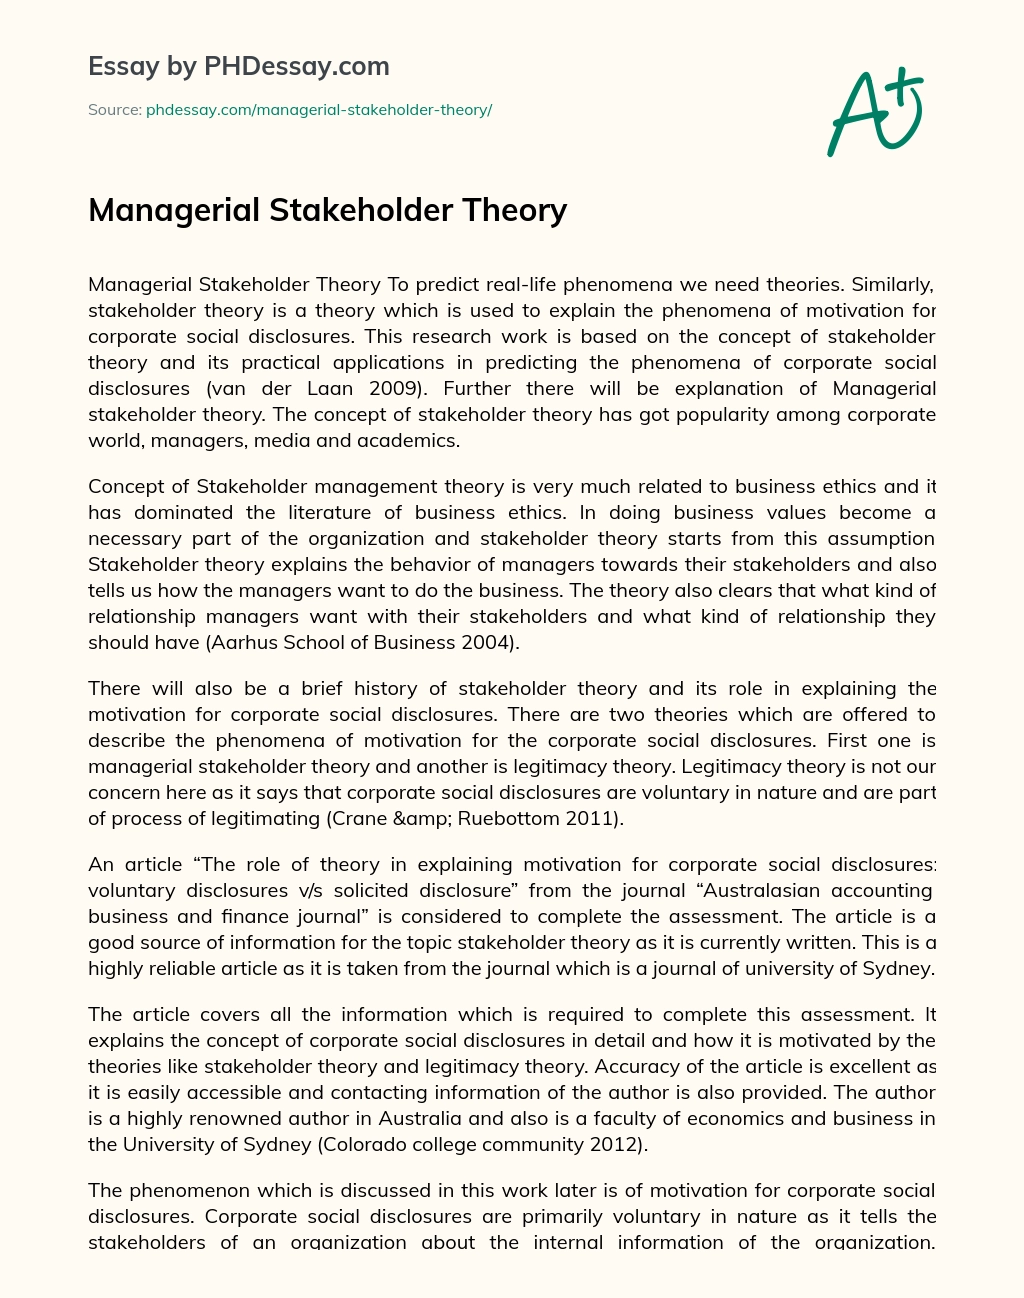 Managerial Stakeholder Theory essay